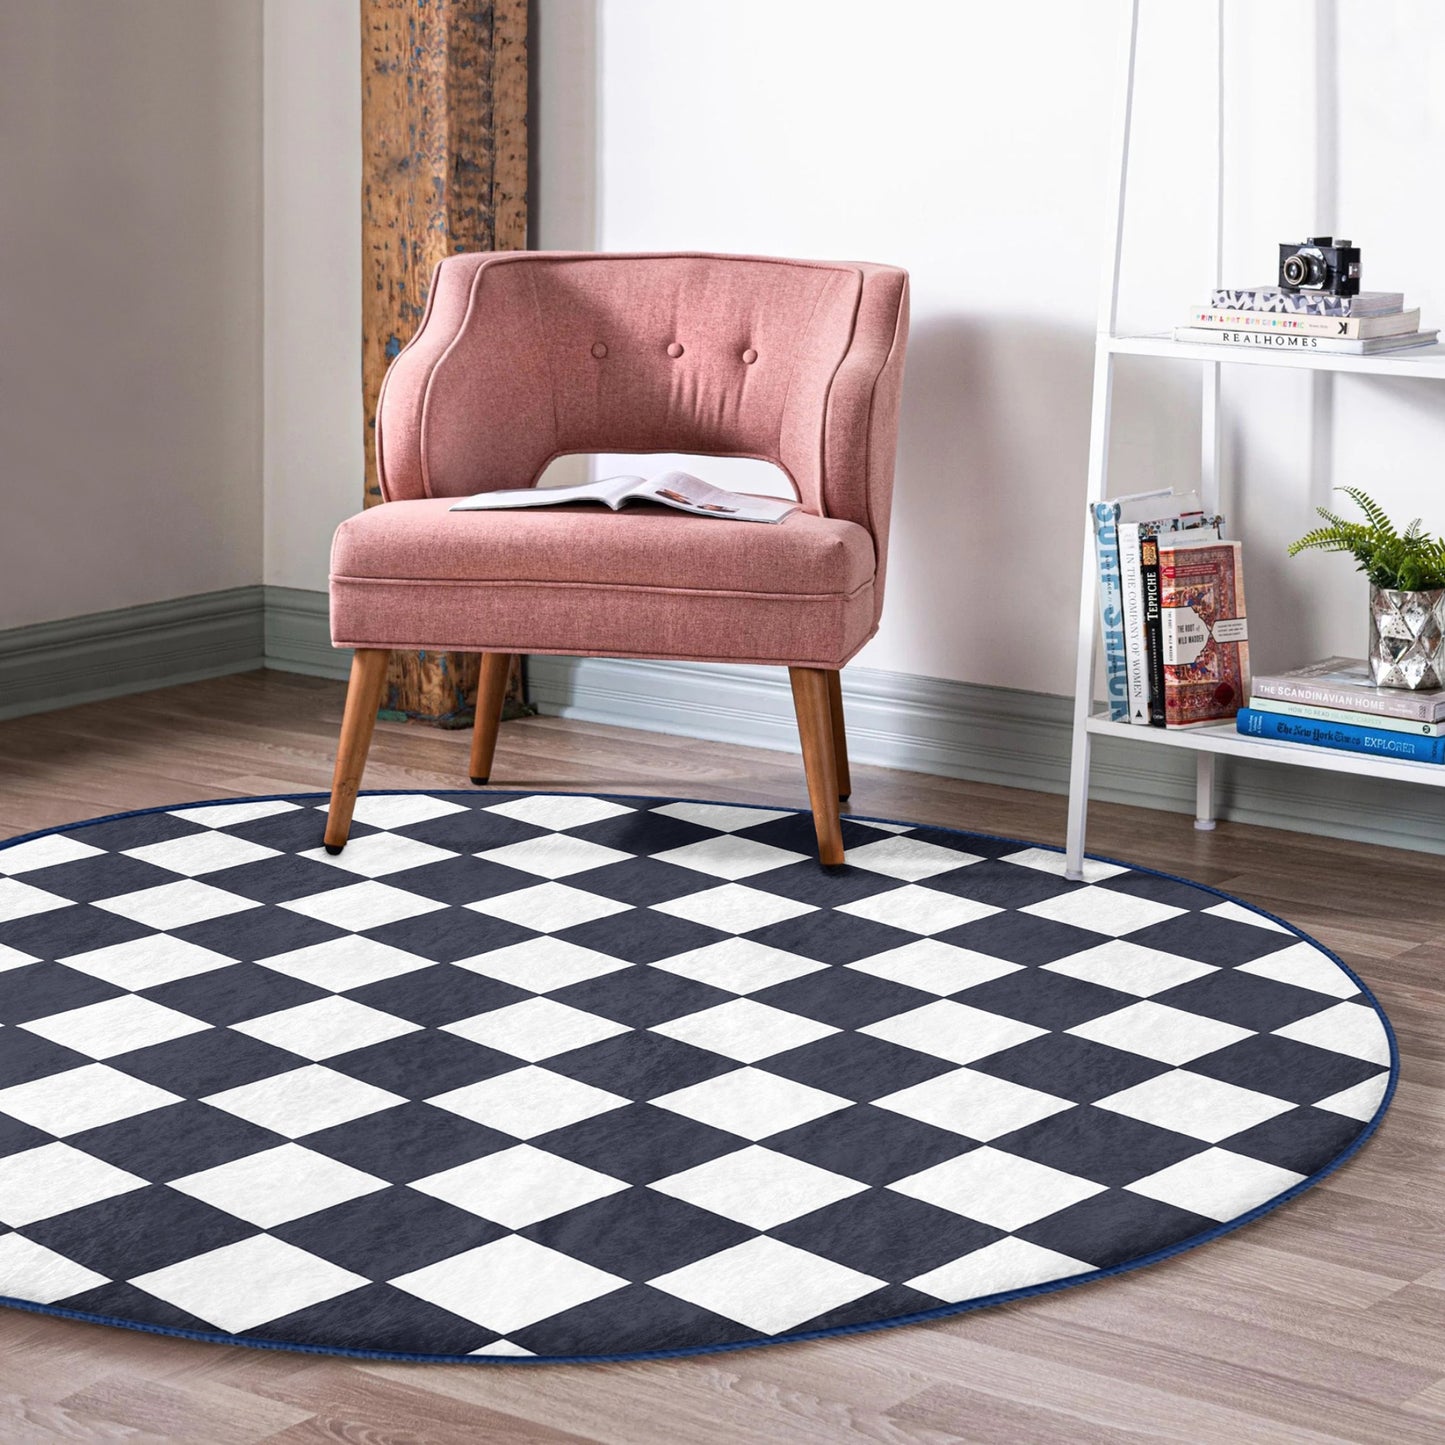 Round Patterned Floor Rug - Cozy Home Accent